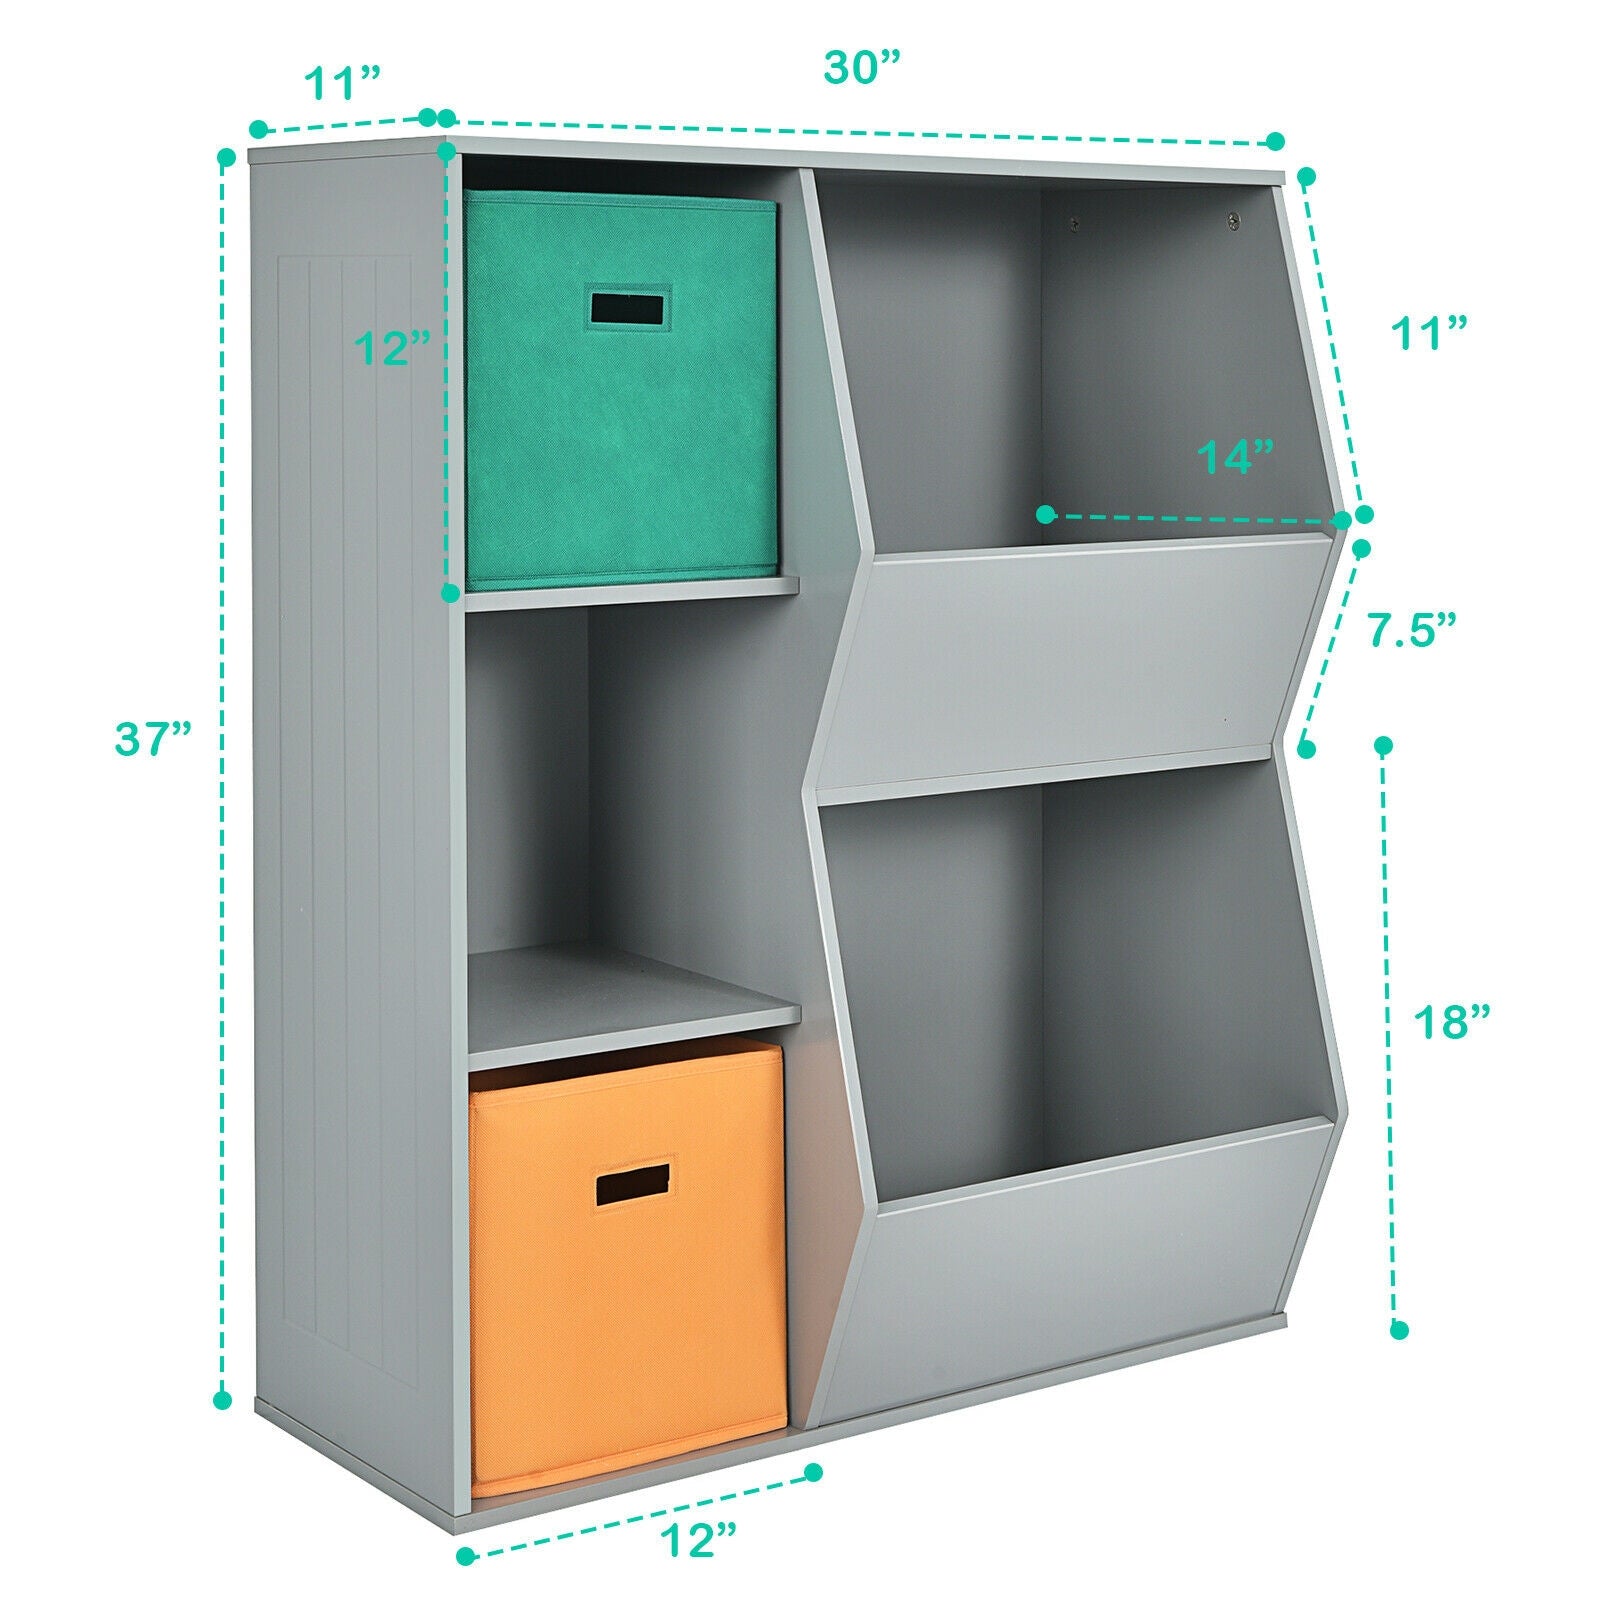 Easy Assembly and Maintenance: The cabinet features a smooth surface with NC paint, allowing for easy cleaning with a damp cloth without causing any harm to your family. The assembly process is effortless and can be completed within a short time. All the necessary tools and detailed instructions are included for your convenience.